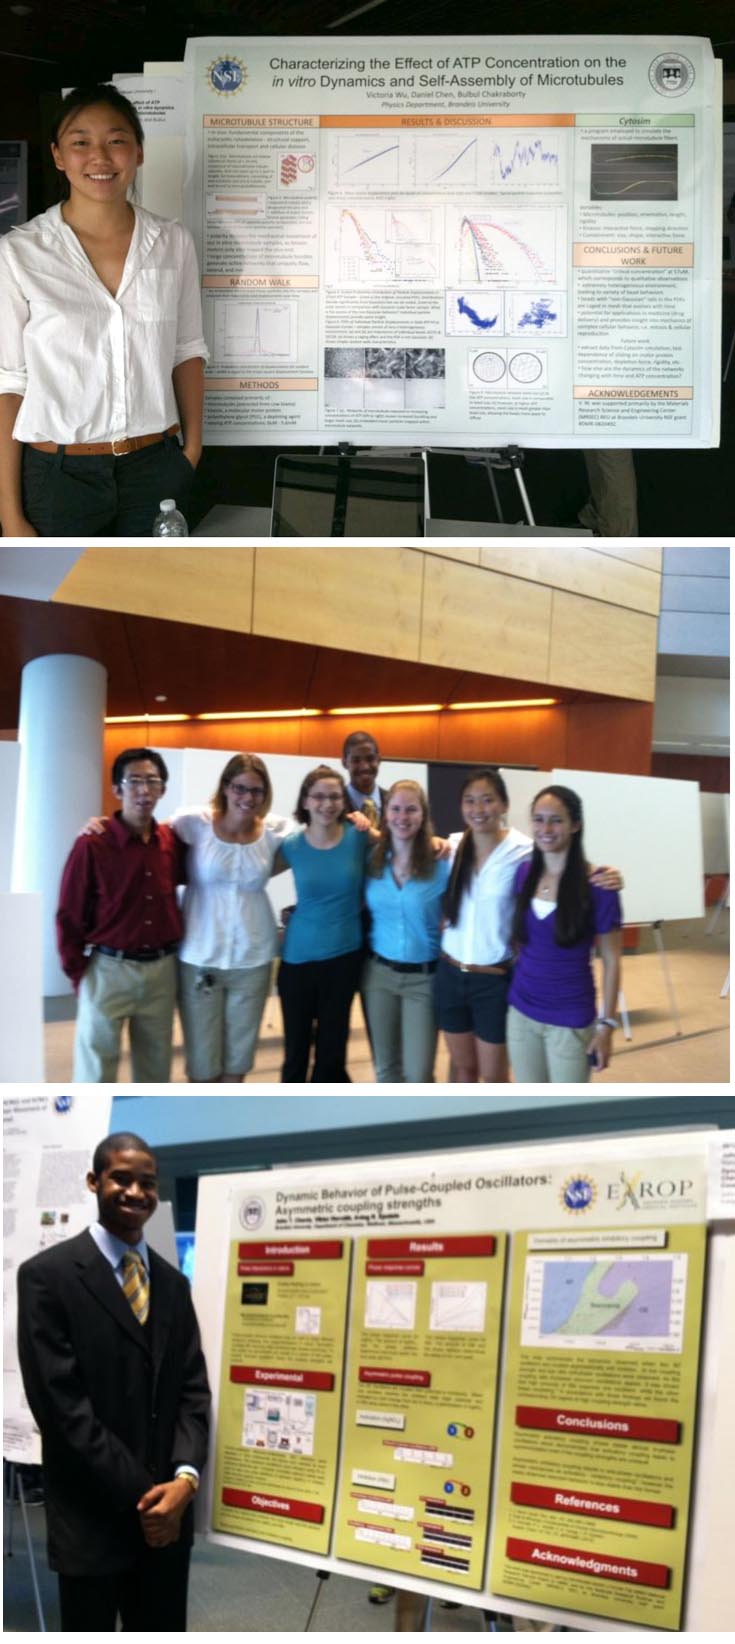 Top: Student standing with her poster titled "Characterizing the Effect of ATP Concentration on the in vitro Dynamics and Self-Assembly of Microtubules. Middle: Student with his poster. Bottom picture: Group picture of the six REU students at the research symposia.